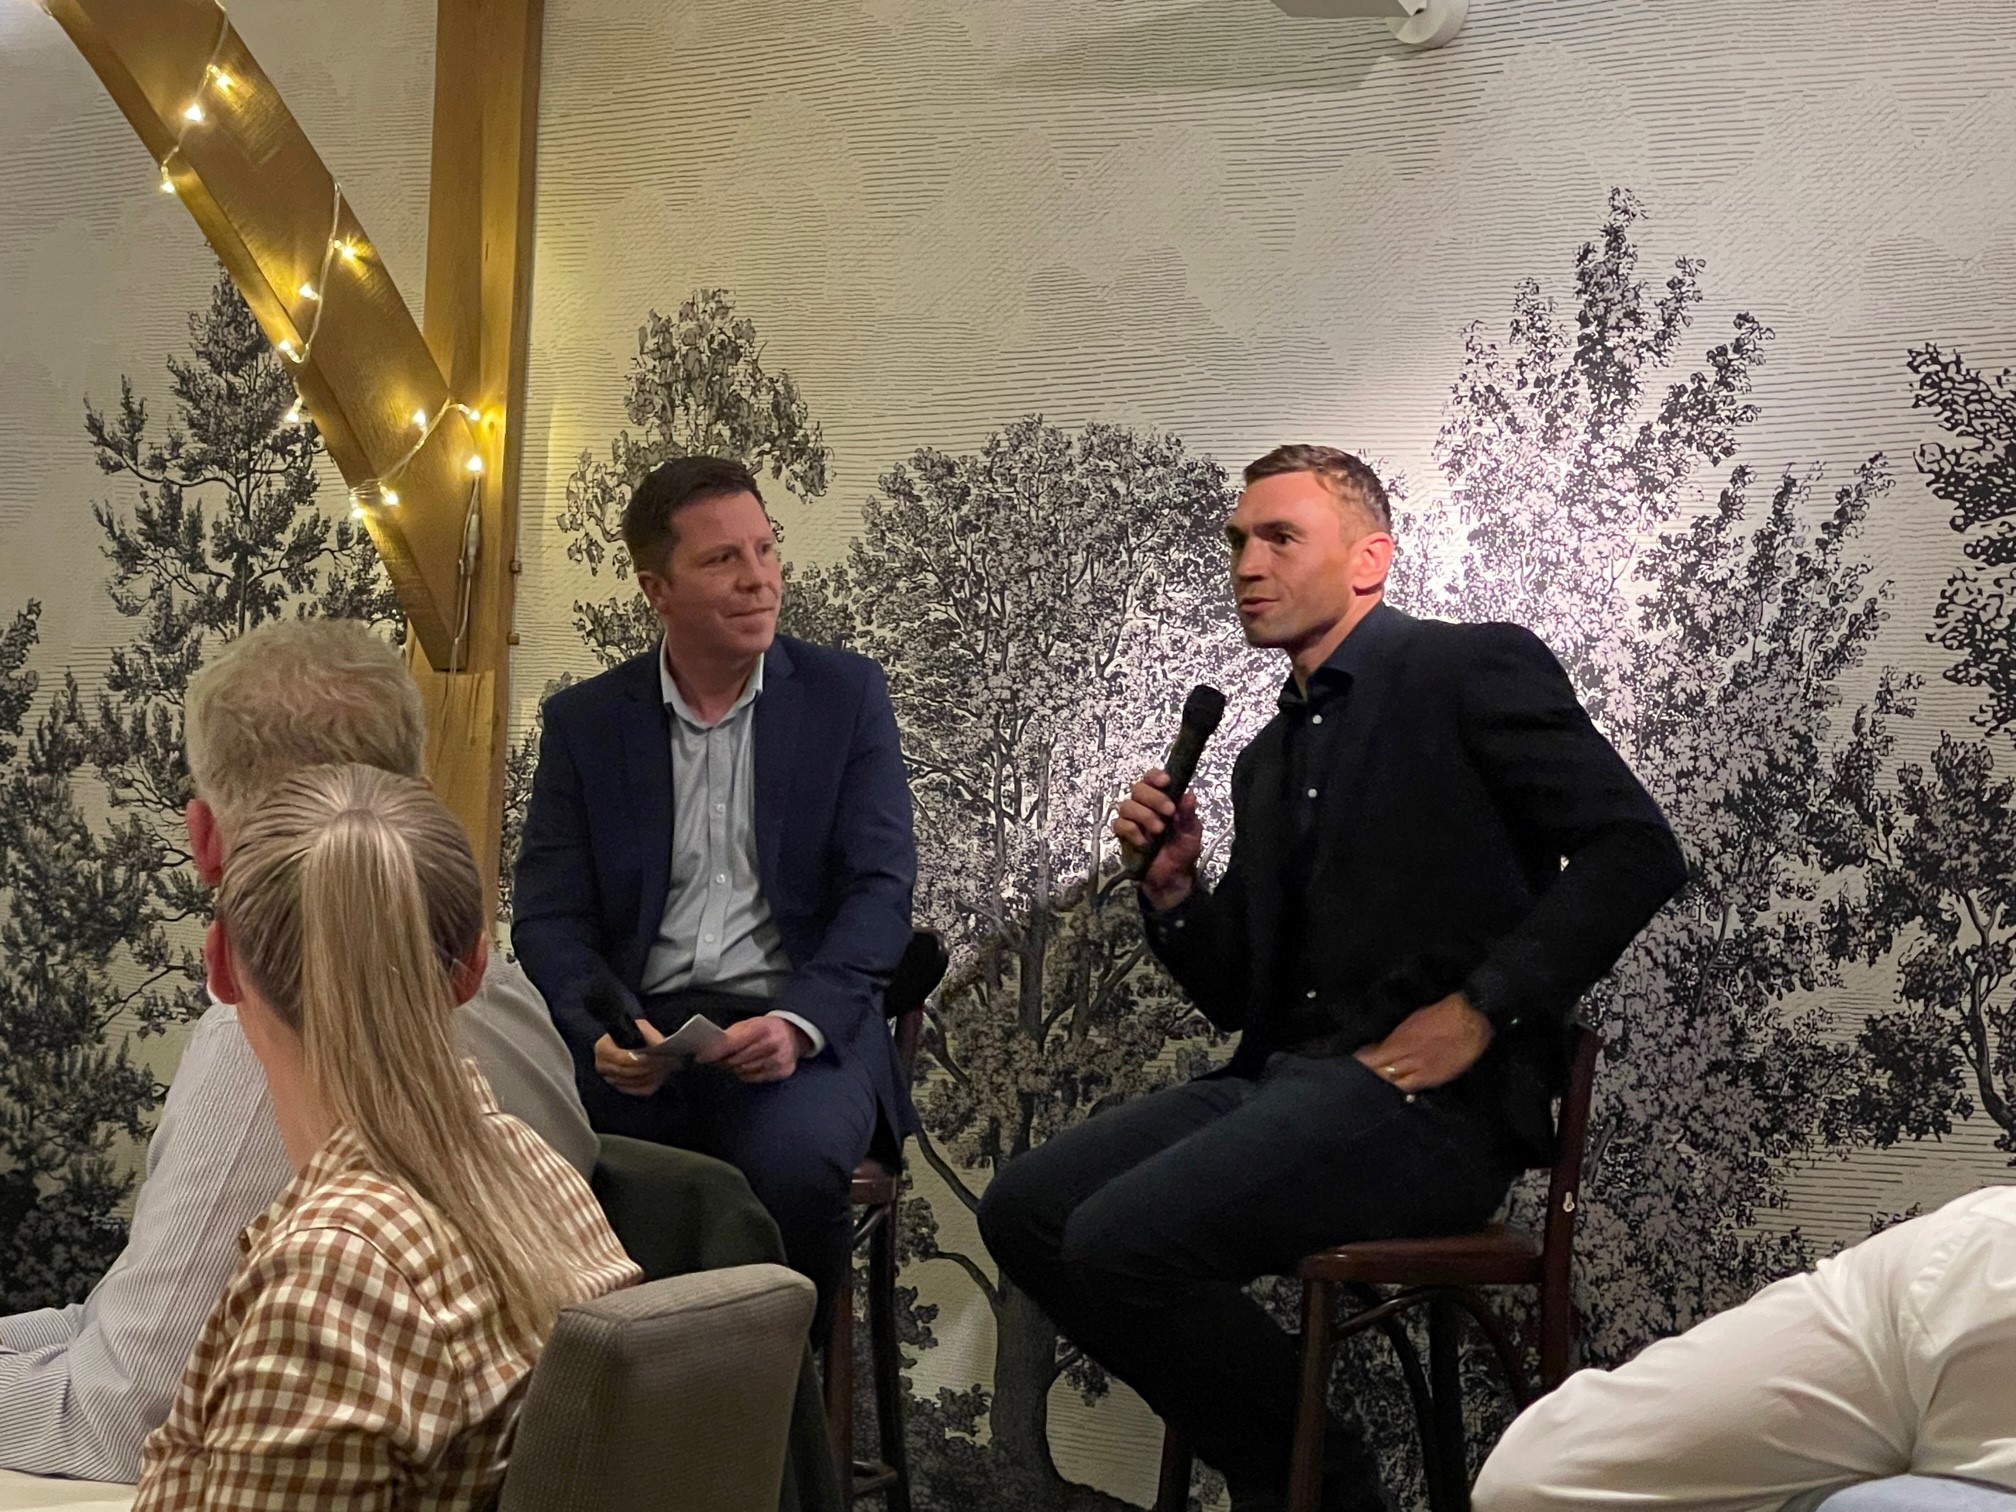 Kevin Sinfield OBE’s inspirational story raises £4,700 for Mahdlo Youth Zone